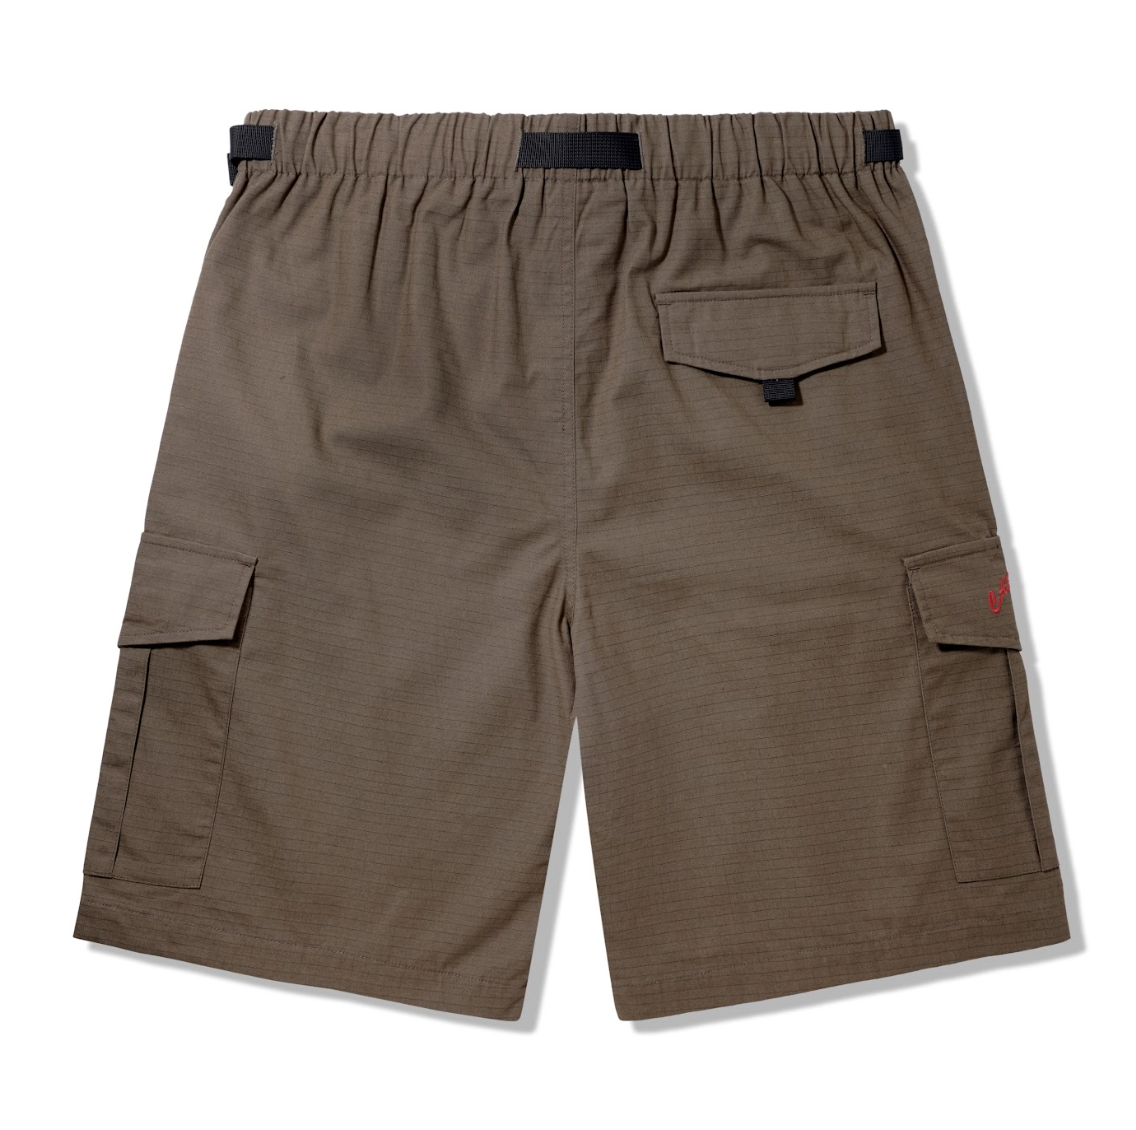 Cash Only - All Terrain Cargo Shorts - Brown